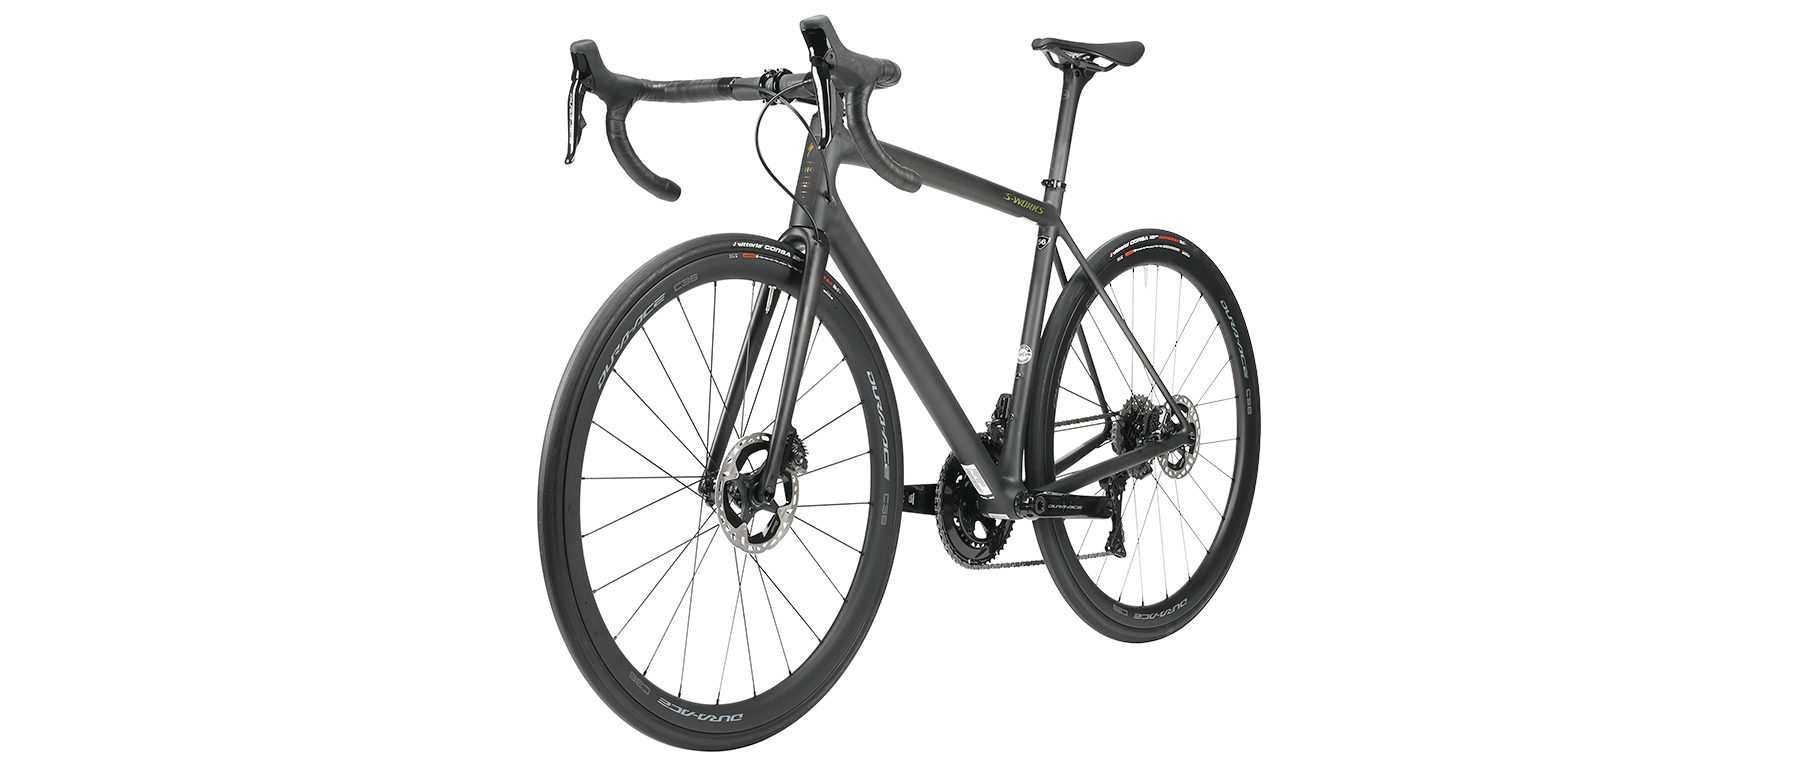 Specialized S-Works Aethos Dura-Ace Di2 12-Speed Bicycle